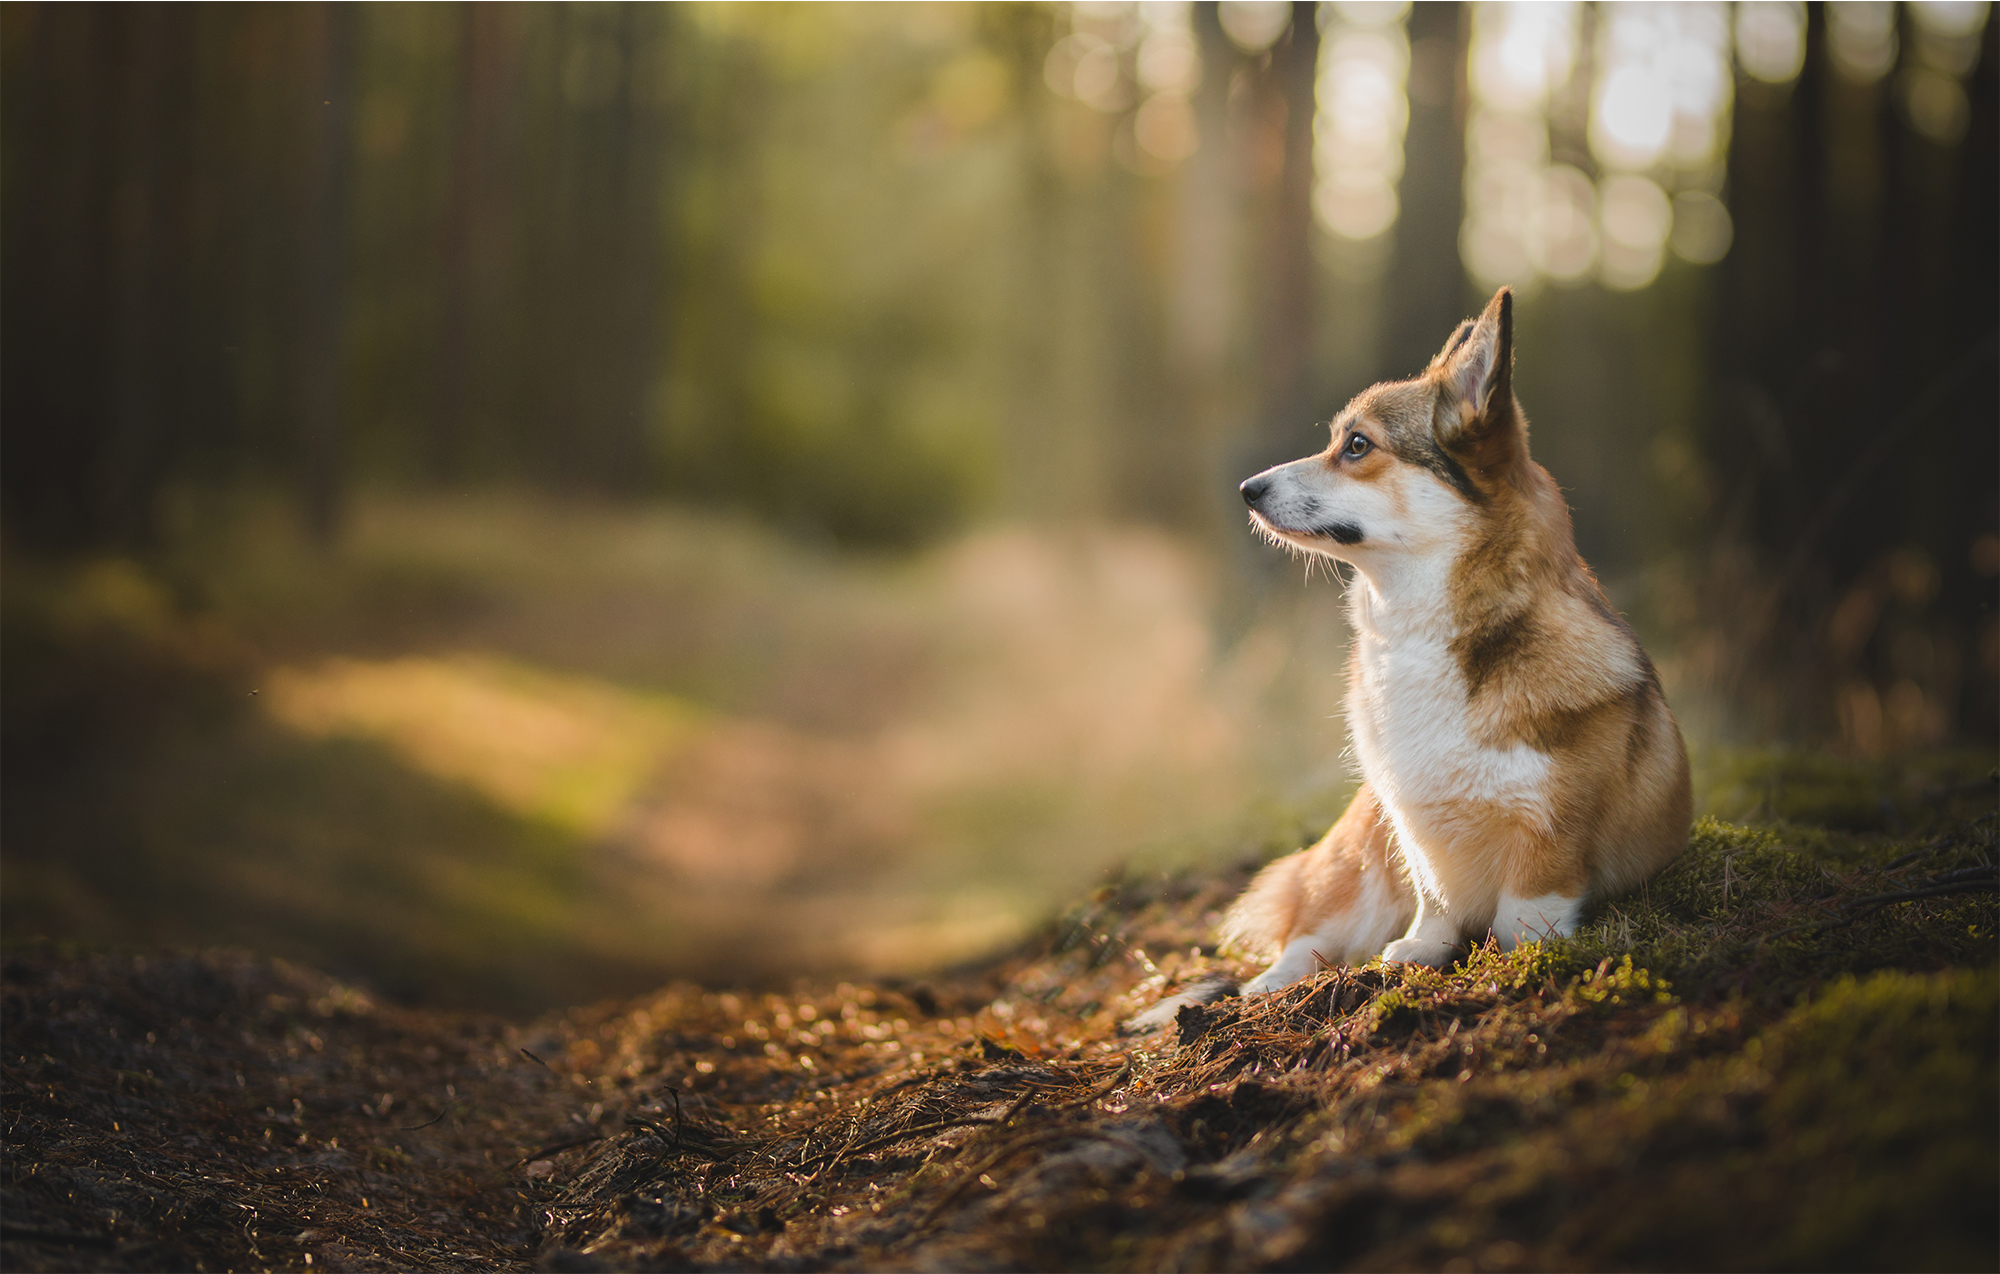 A thoughtful dog sits on mossy forest grass, gazing to the left.